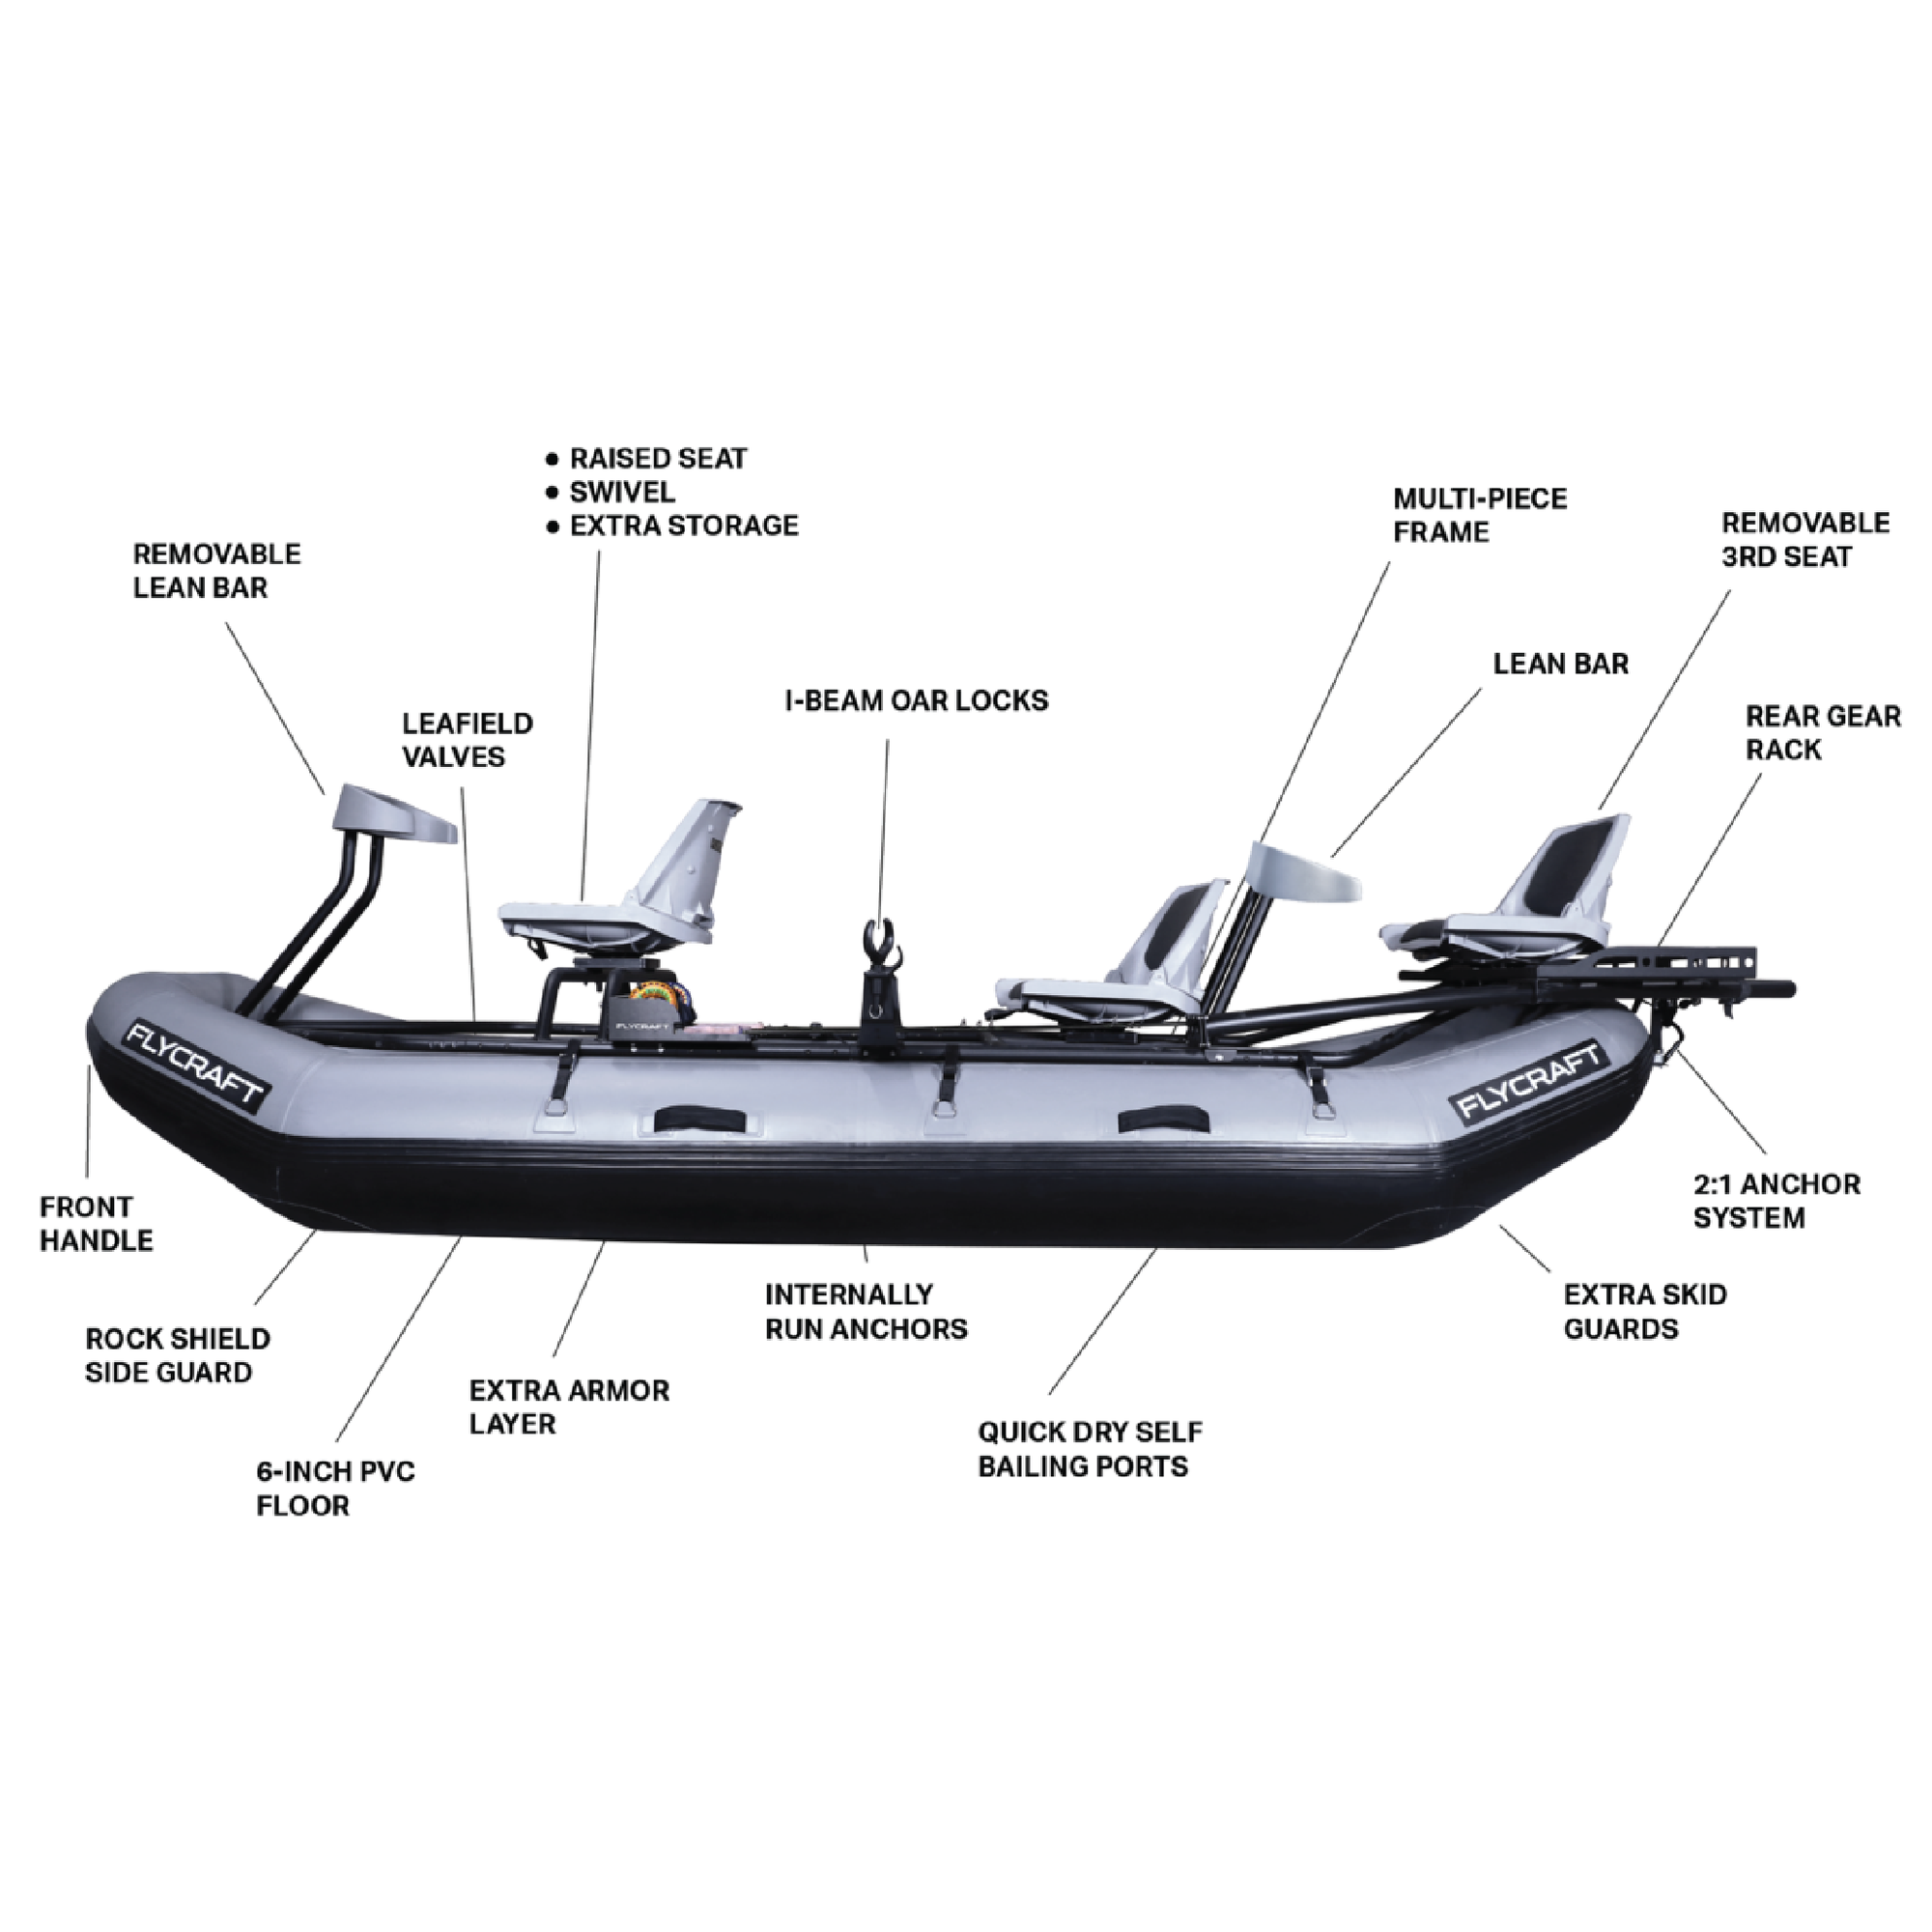 Flycraft's Inflatable Fishing Boat: X Pro Package (2 or 3-Man